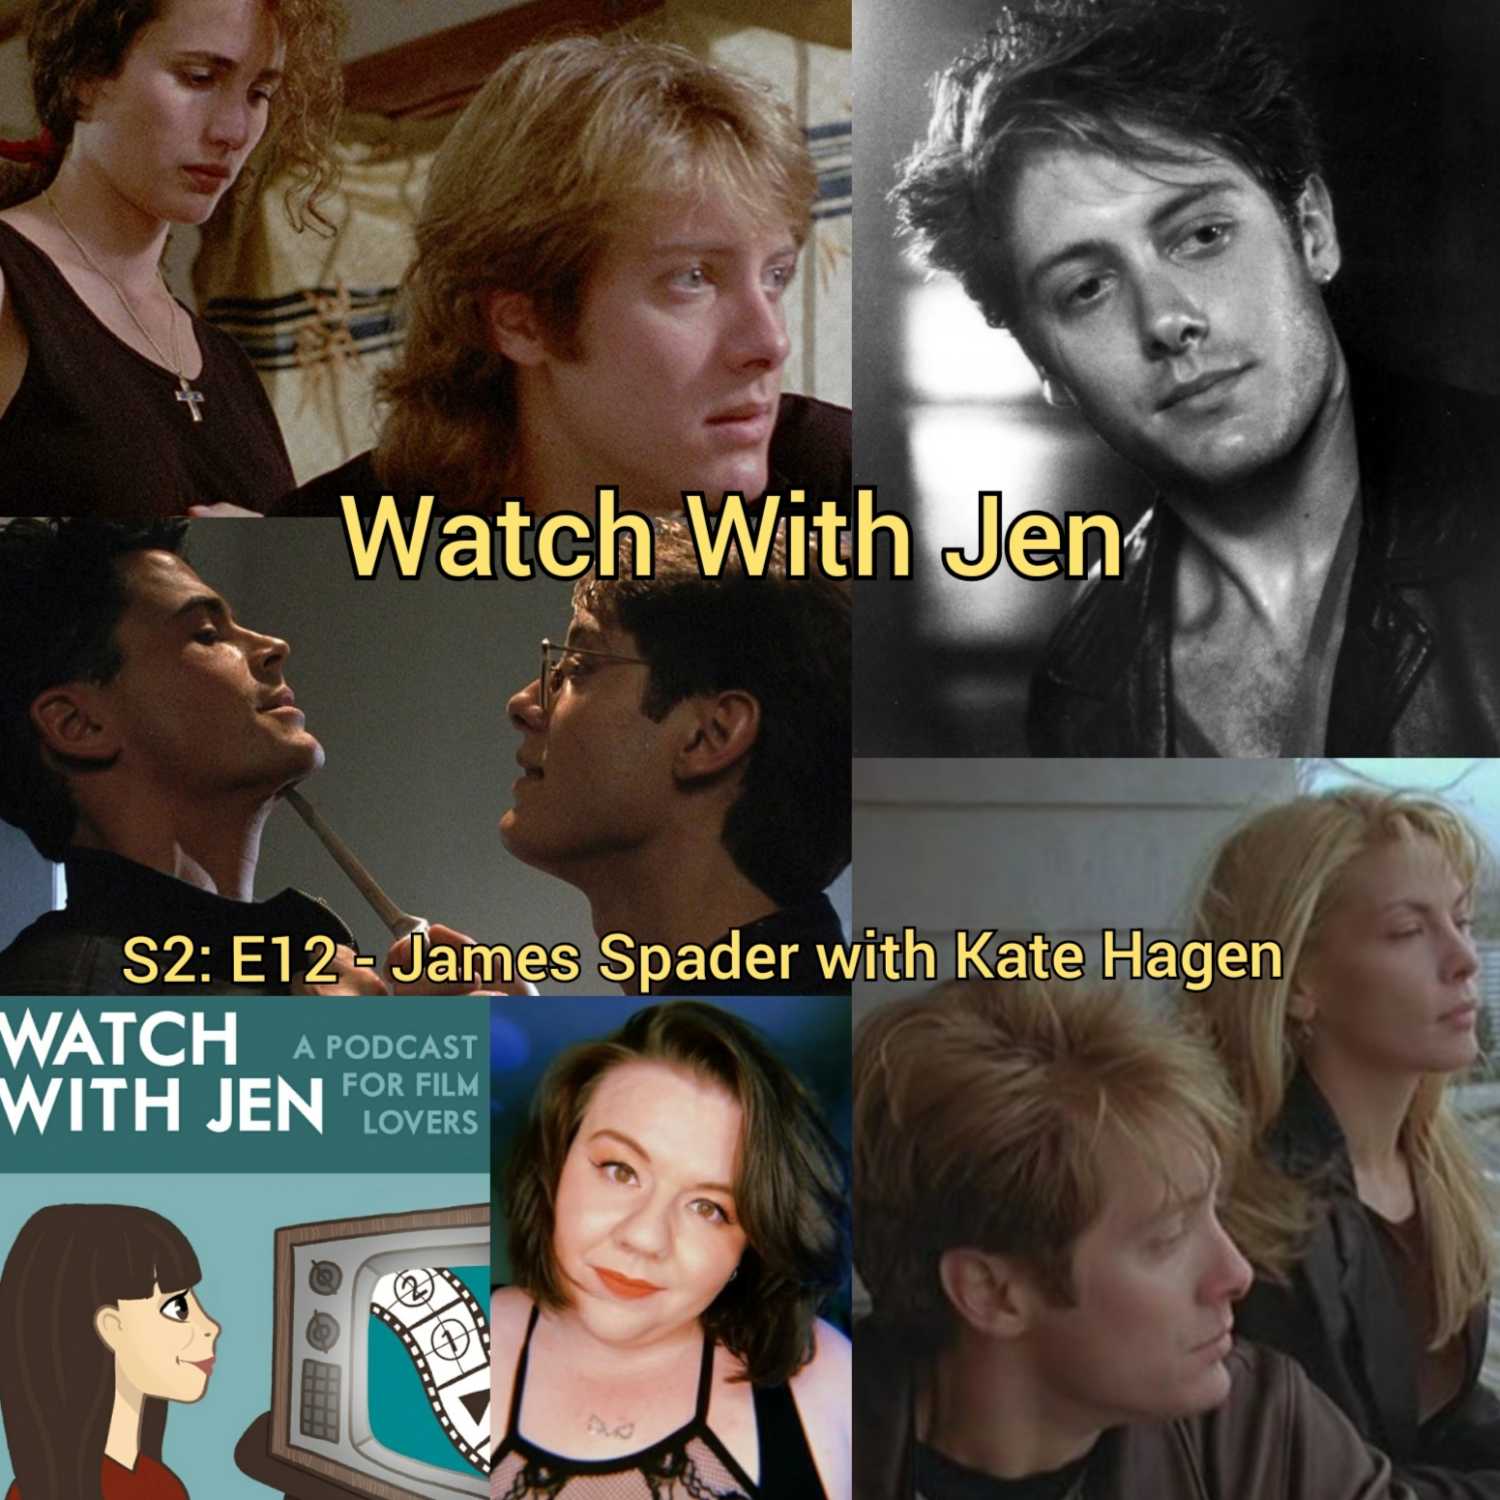 Watch With Jen - S2: E12 - James Spader with Kate Hagen